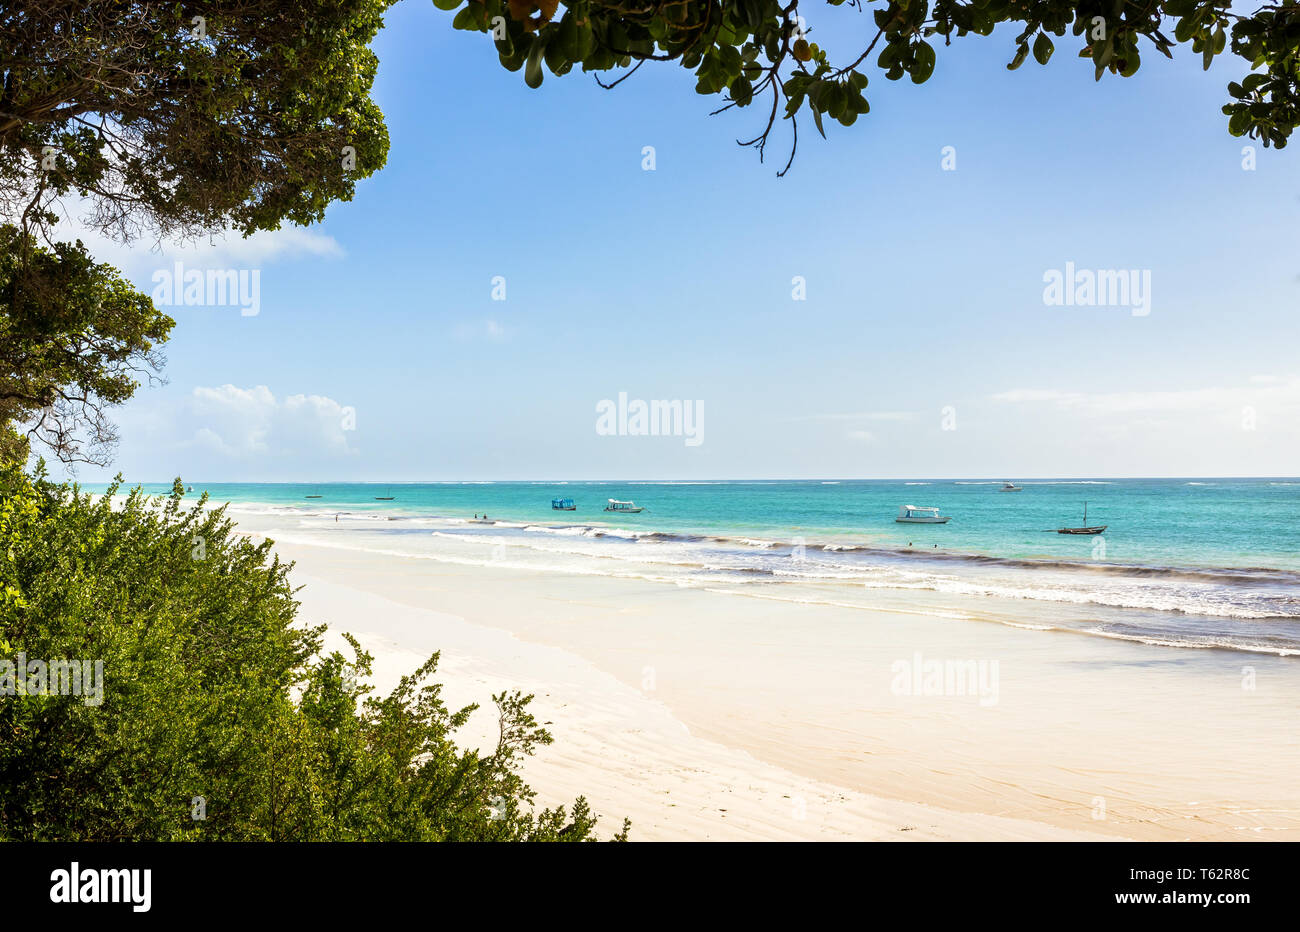 Amazing Diani beach seascape with white sand and turquoise Indian Ocean, Kenya Stock Photo